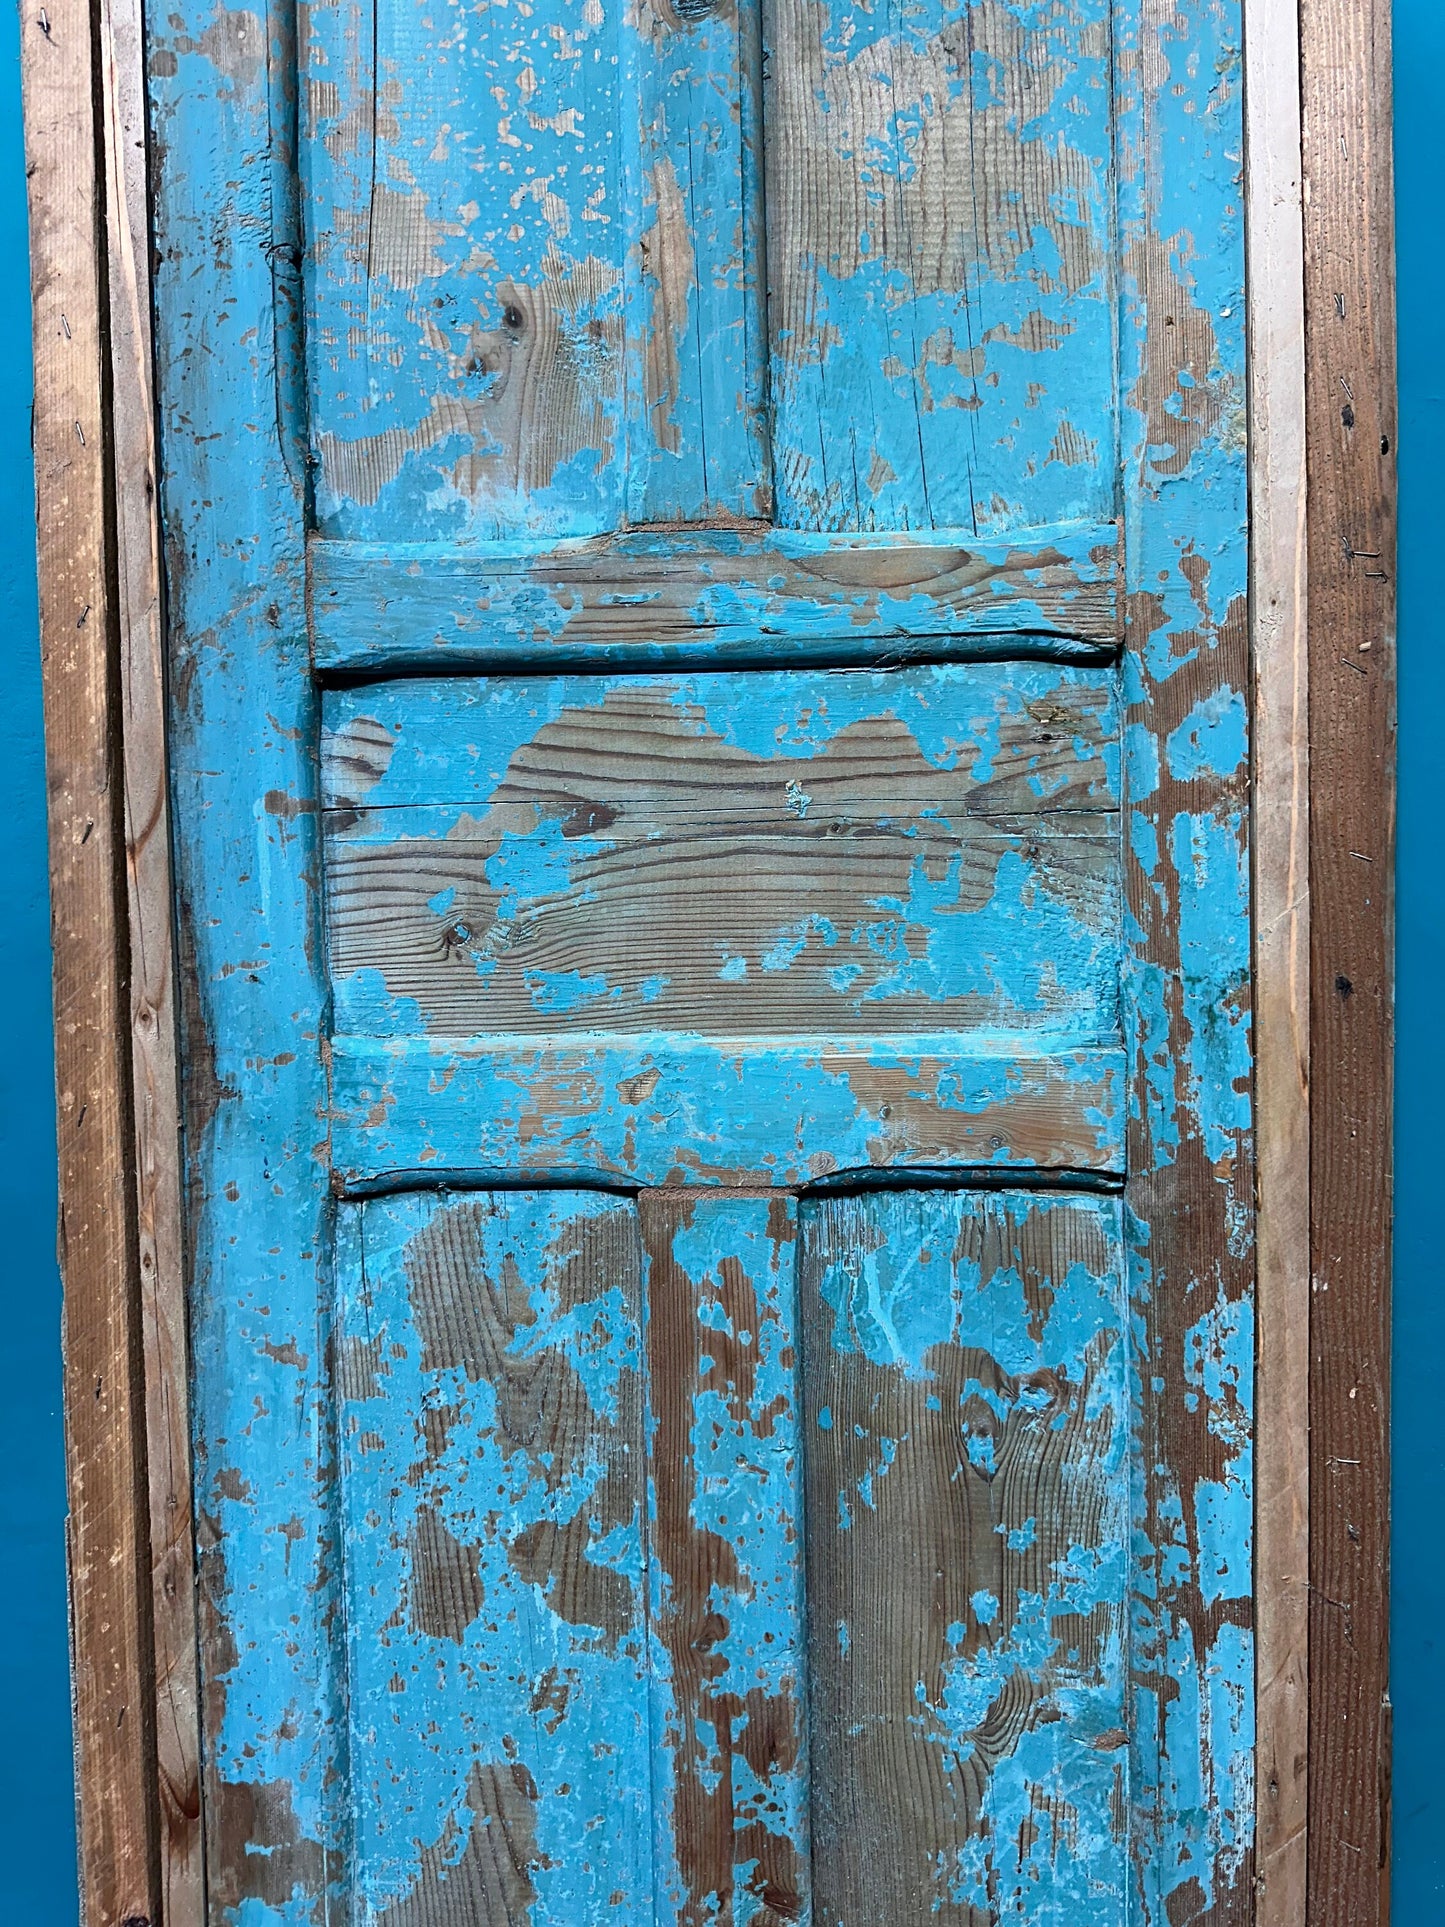 NoW WITH FREE SHIPPiNG - UNIQUE Hand Carved Old Beautiful Wooden Door, Moroccan Vintage Door.